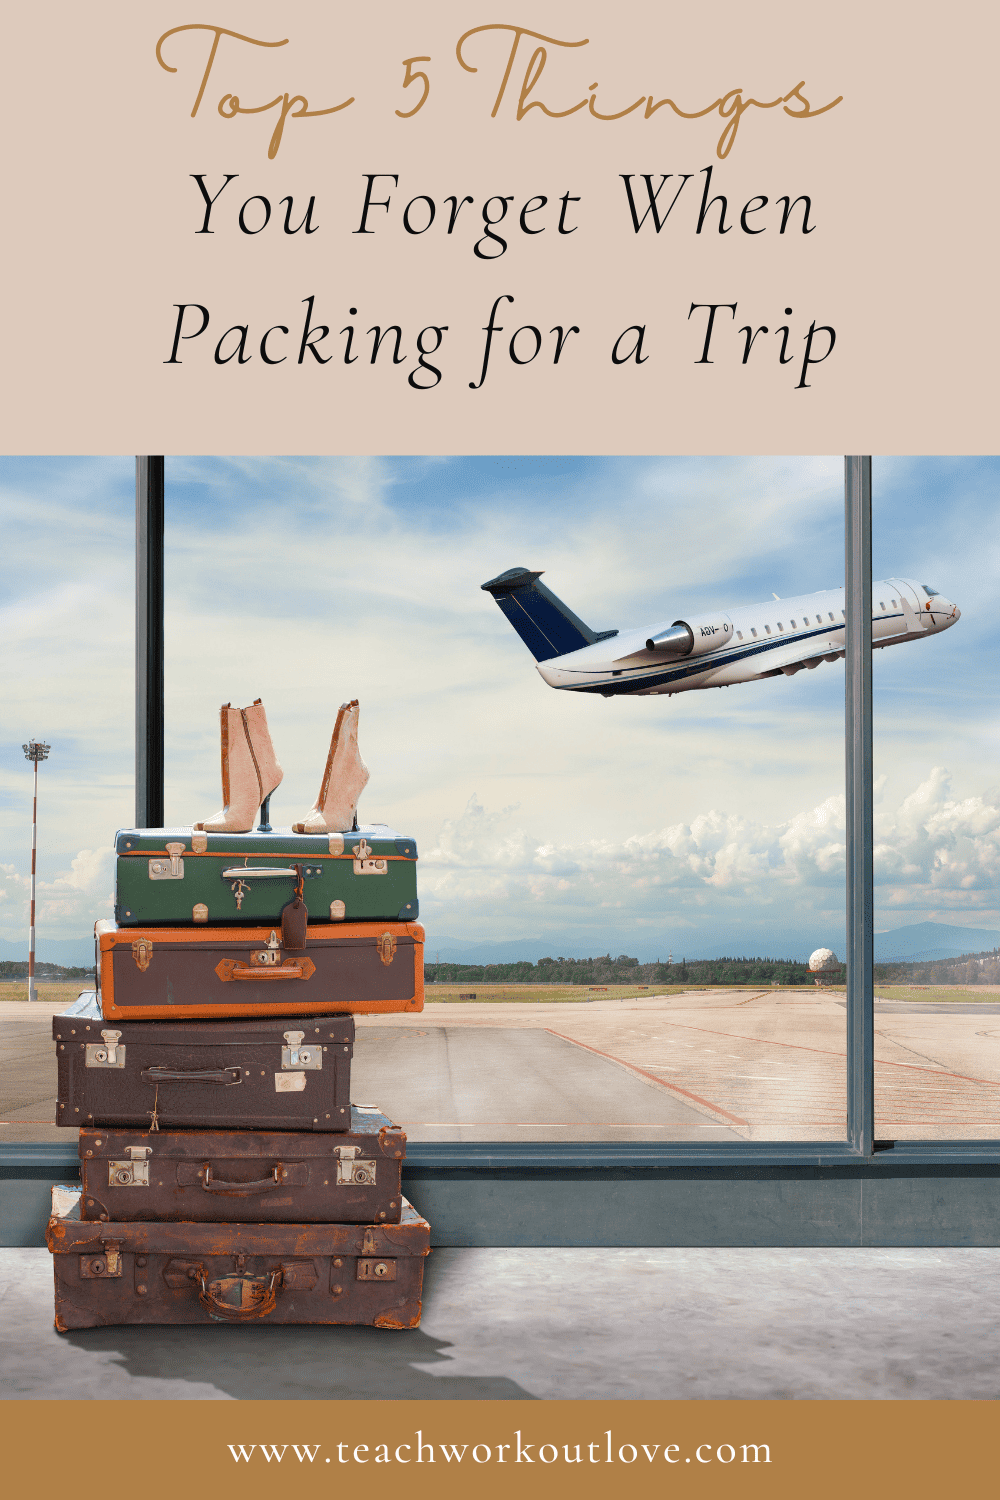 Packing for a trip is always stressful. We put together a list of the items that are always left behind when traveling. 